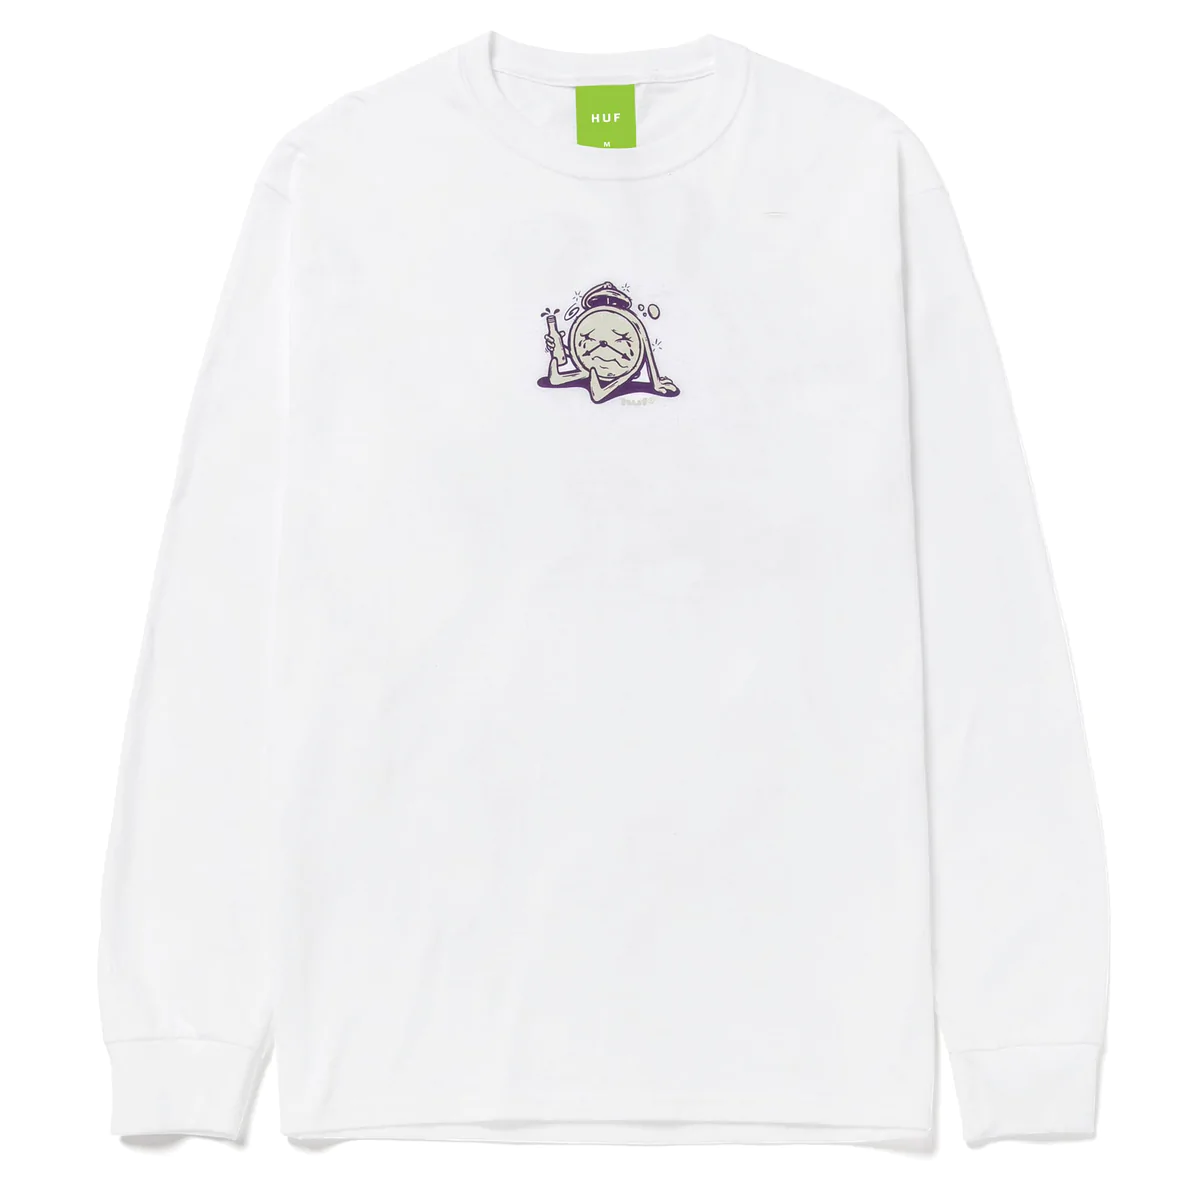 Wasted Time LS T-Shirt - White